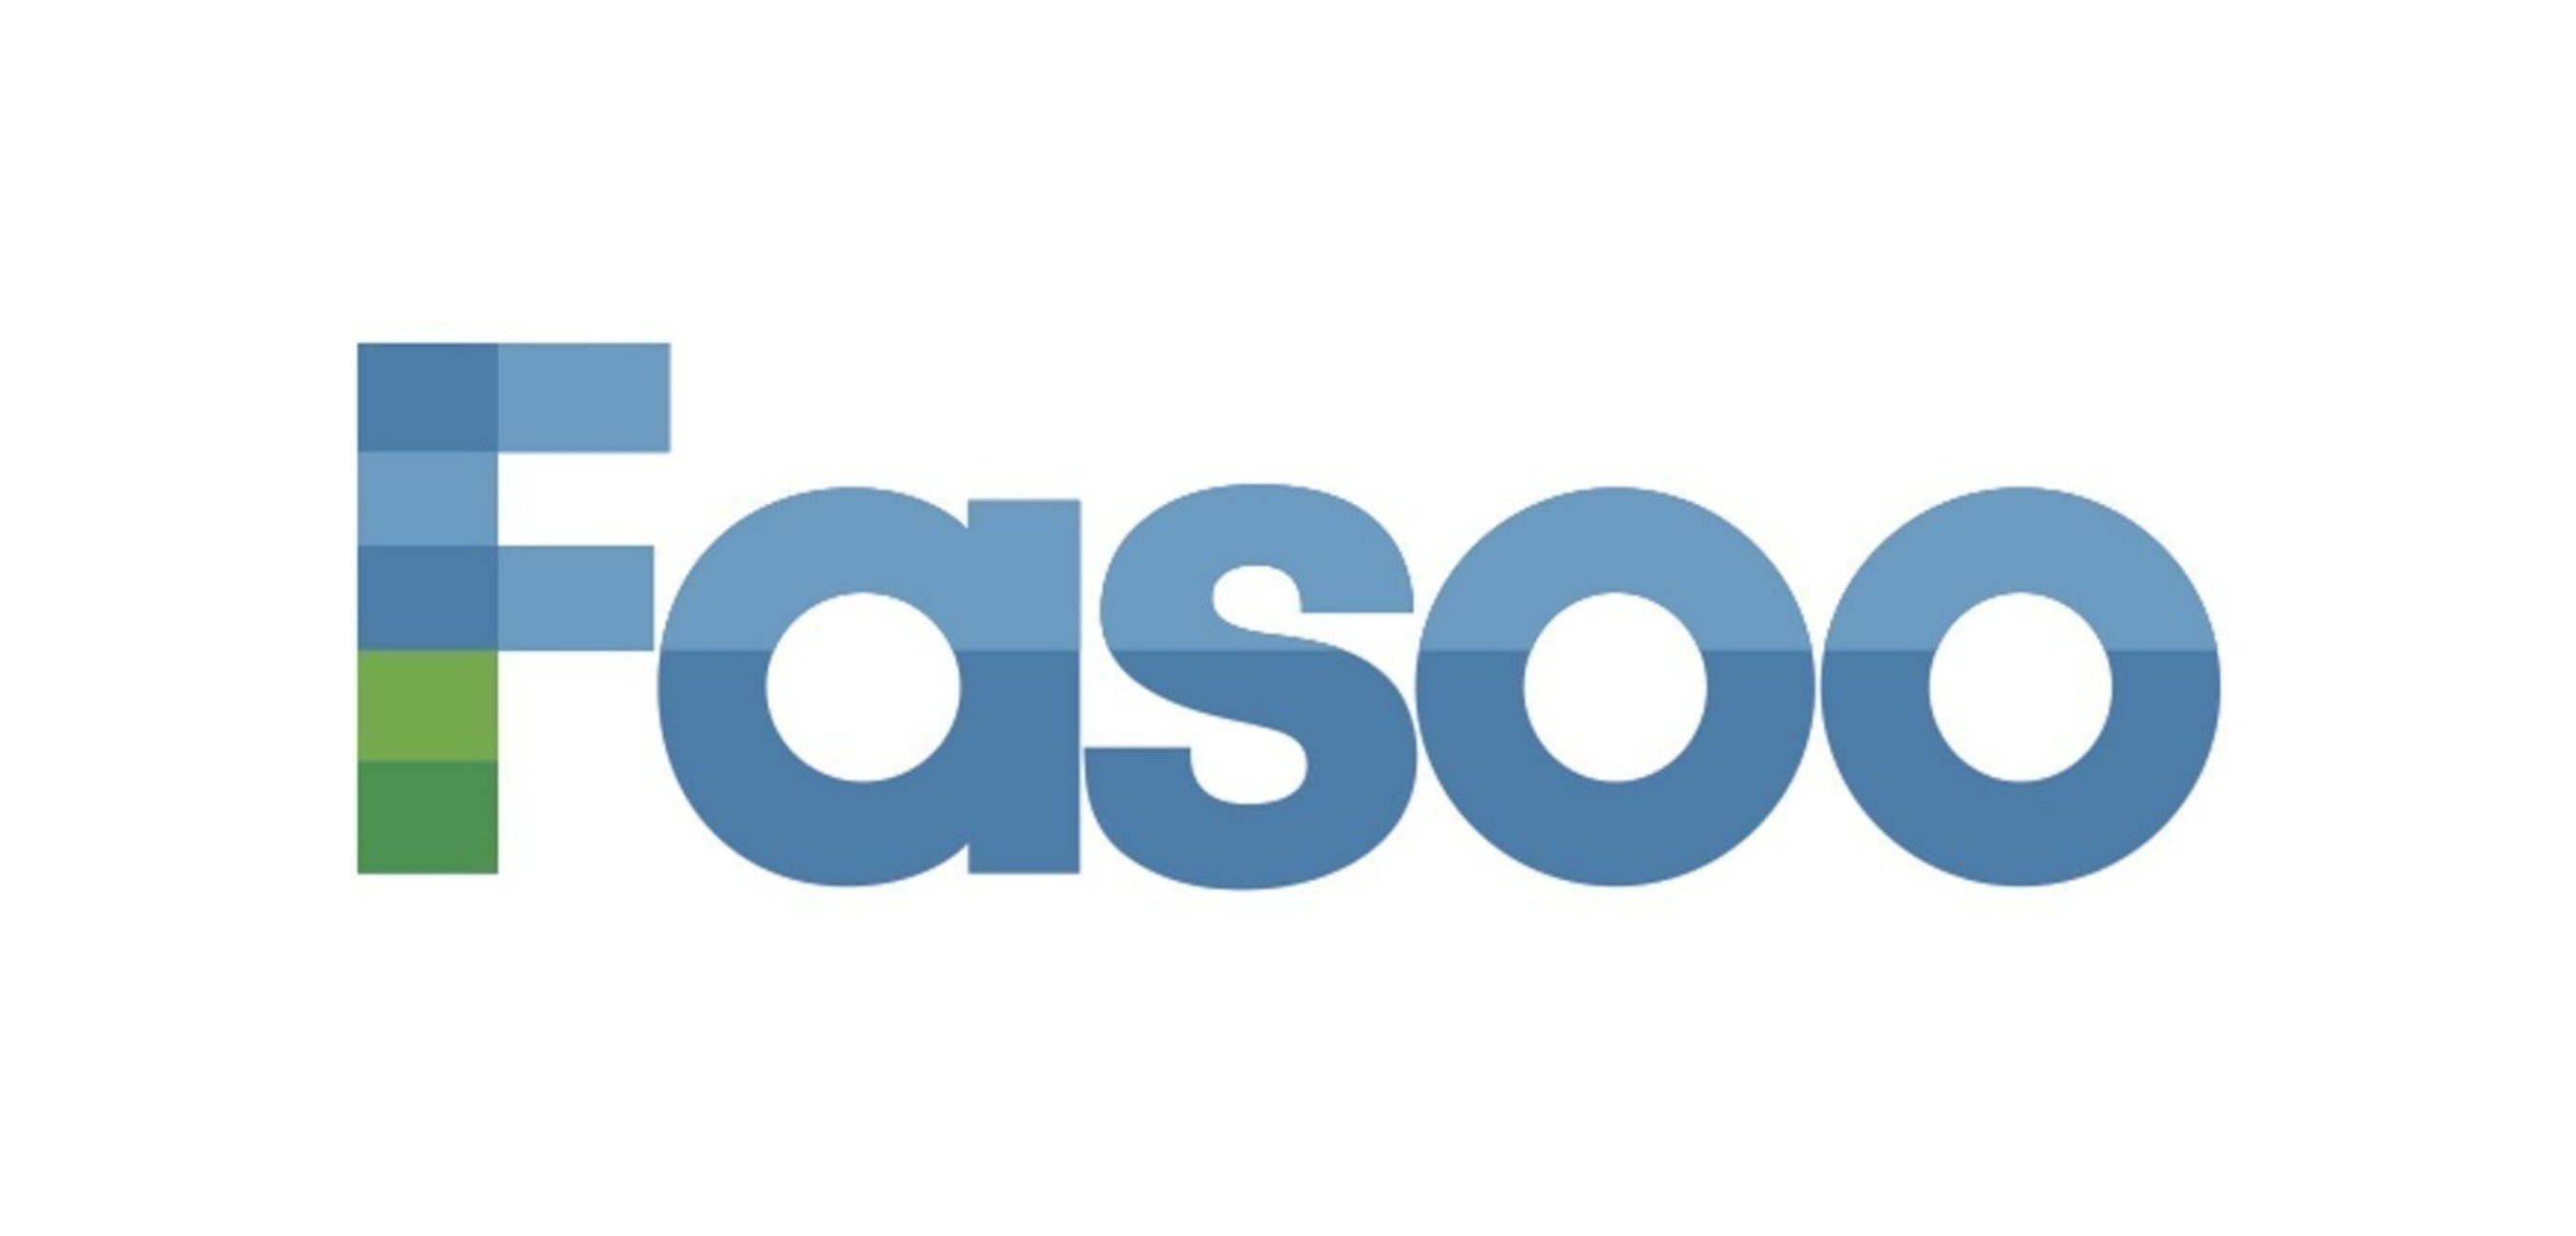 Fasoo provides software to protect and manage your valuable assets in the ever changing digital world. Since 2000, Fasoo has helped customers create a secure information sharing environment and simplified secure collaboration internally and externally. For more information on Fasoo please visit: http://www.fasoo.com.